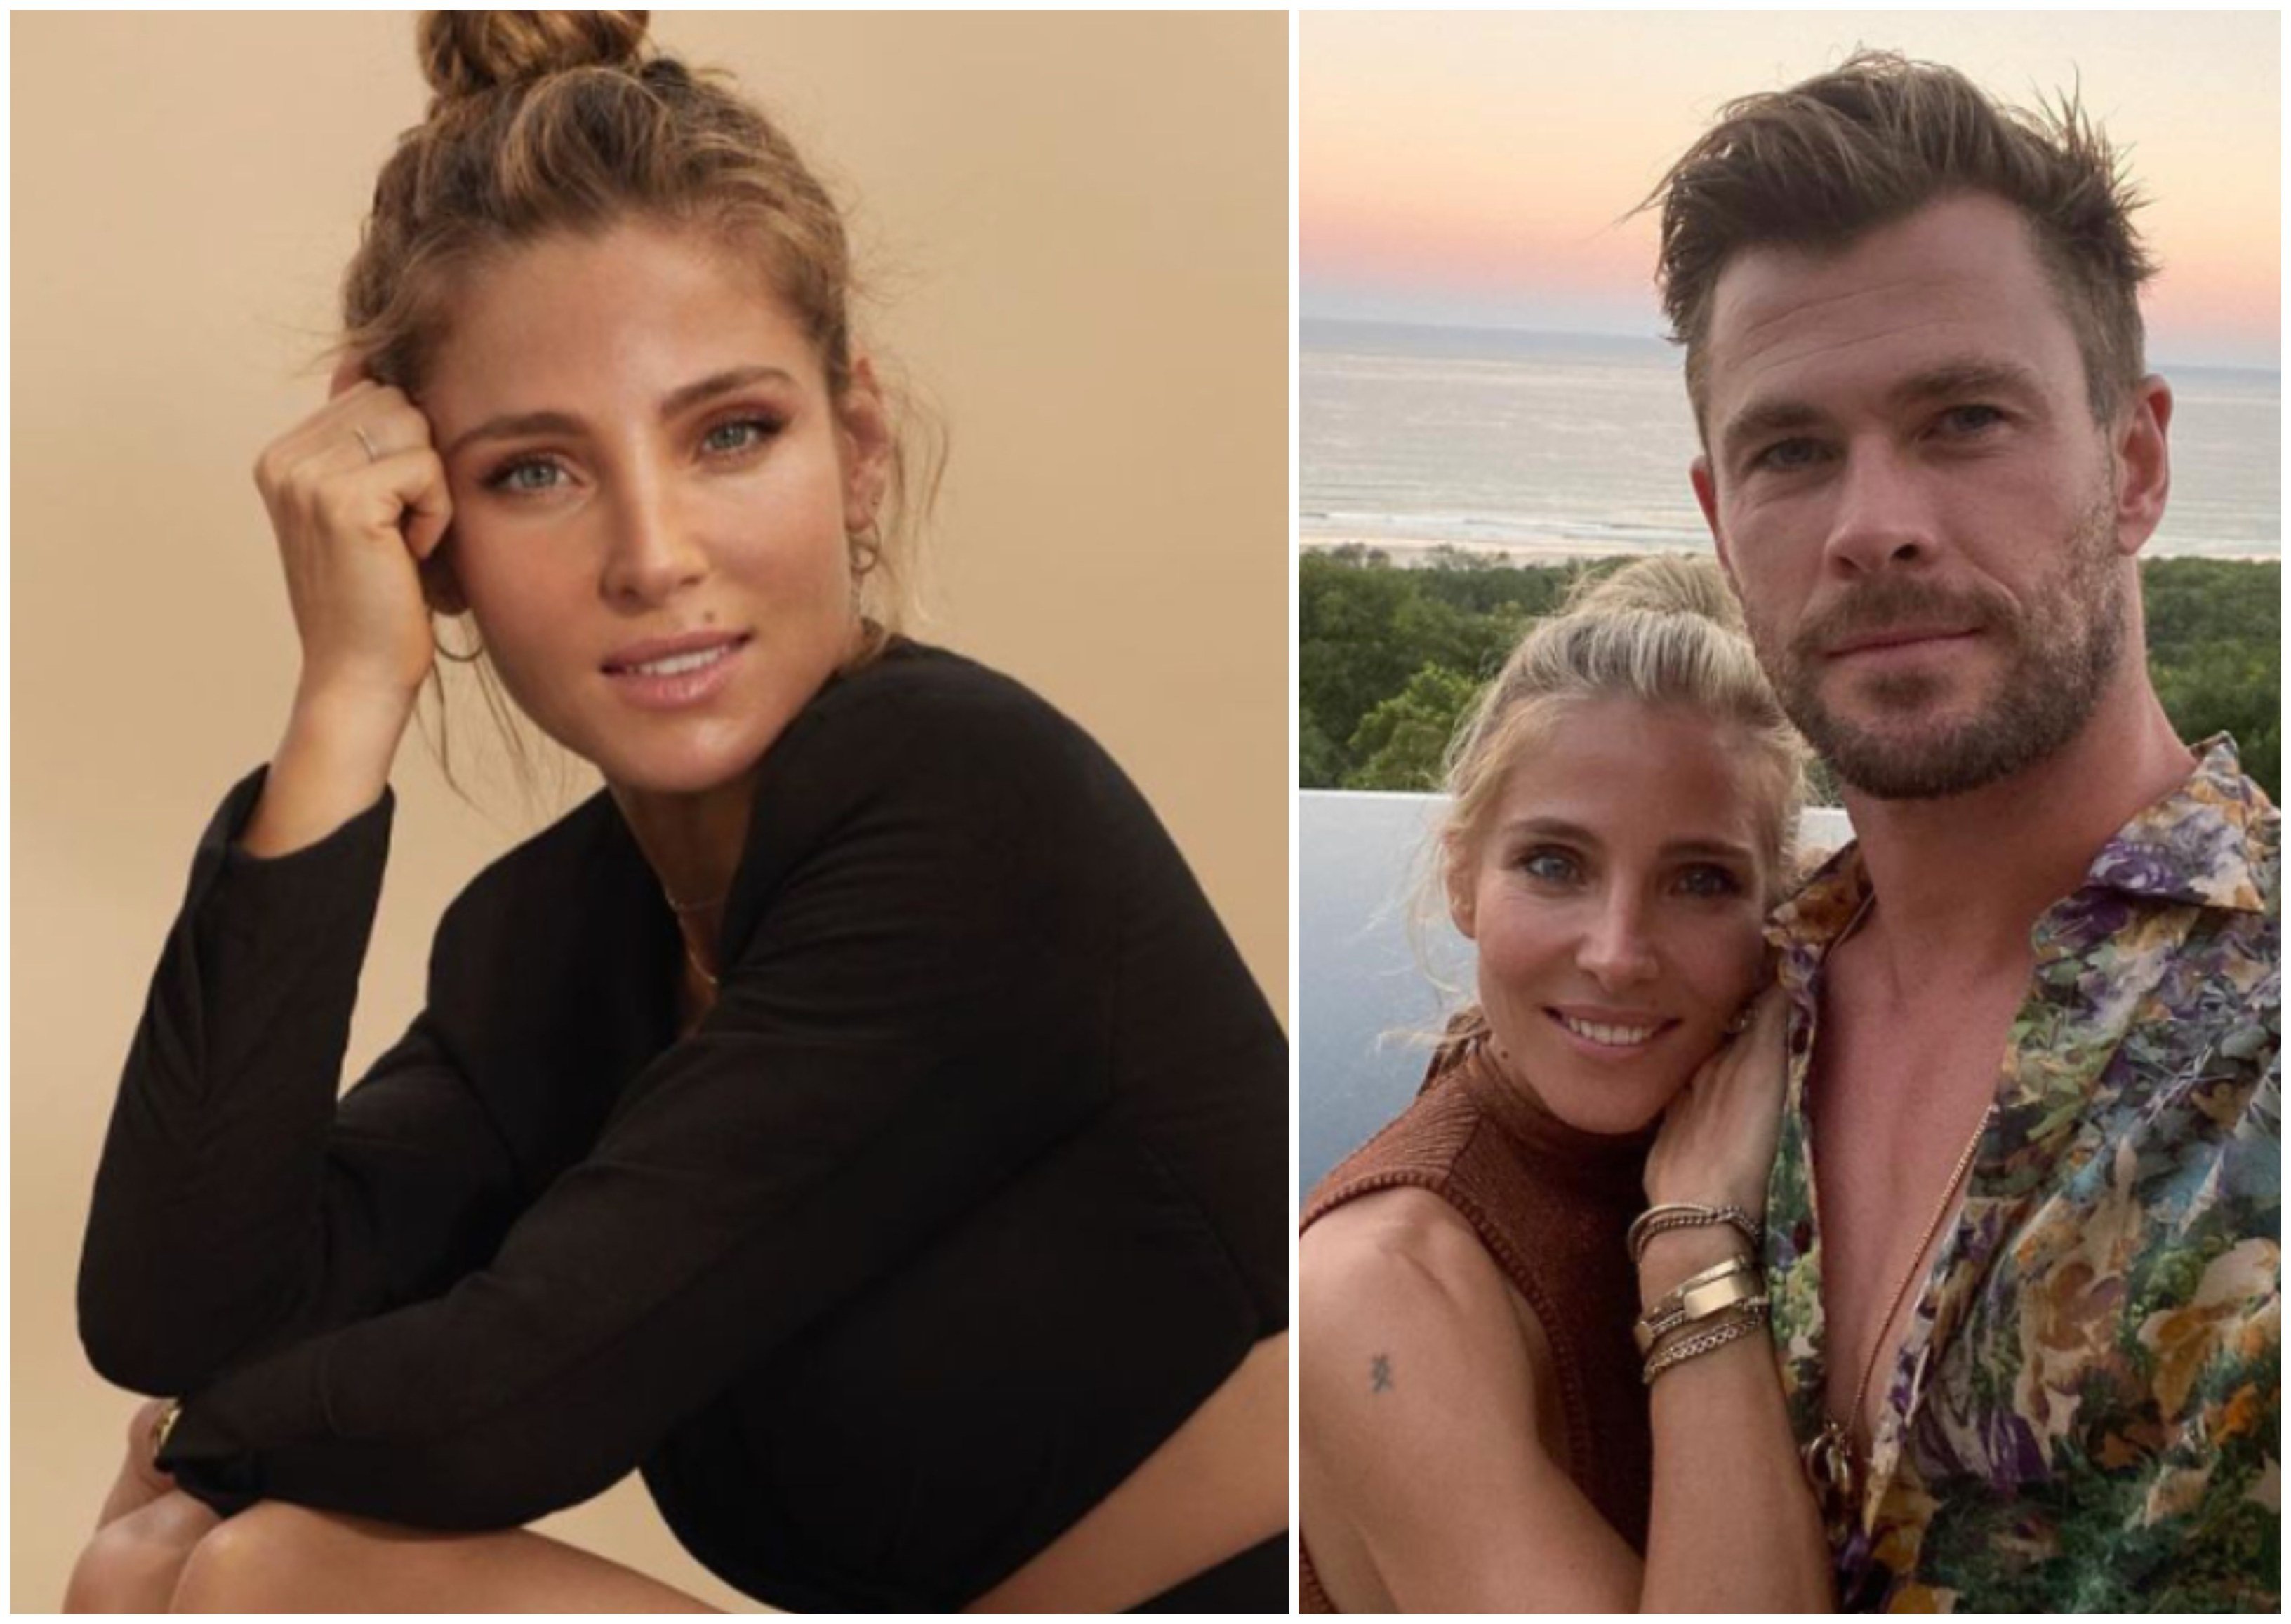 Elsa Pataky and Chris Hemsworth work, workout and parent together. Photos: @elsapatakyconfidential/Instagram